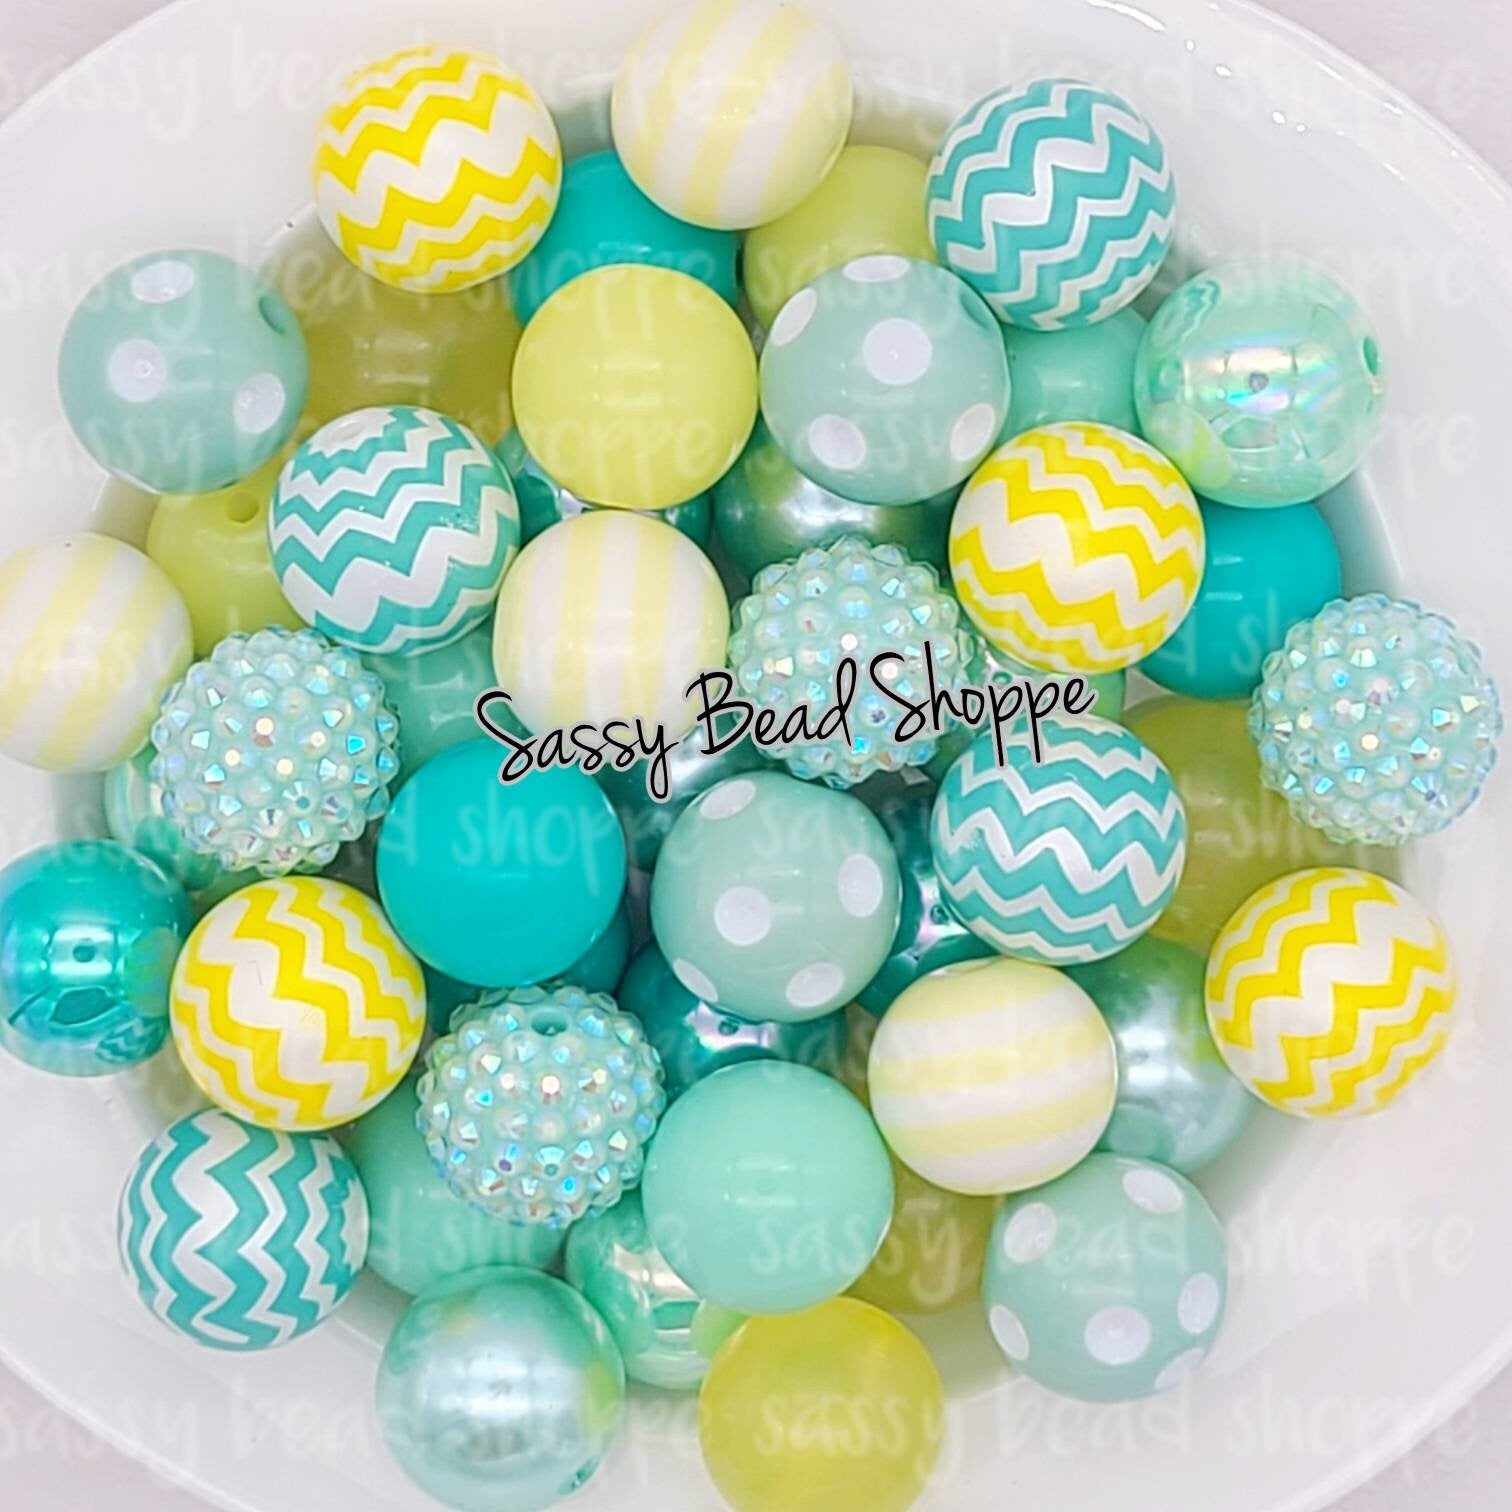 Stay Sweet Bead Mix